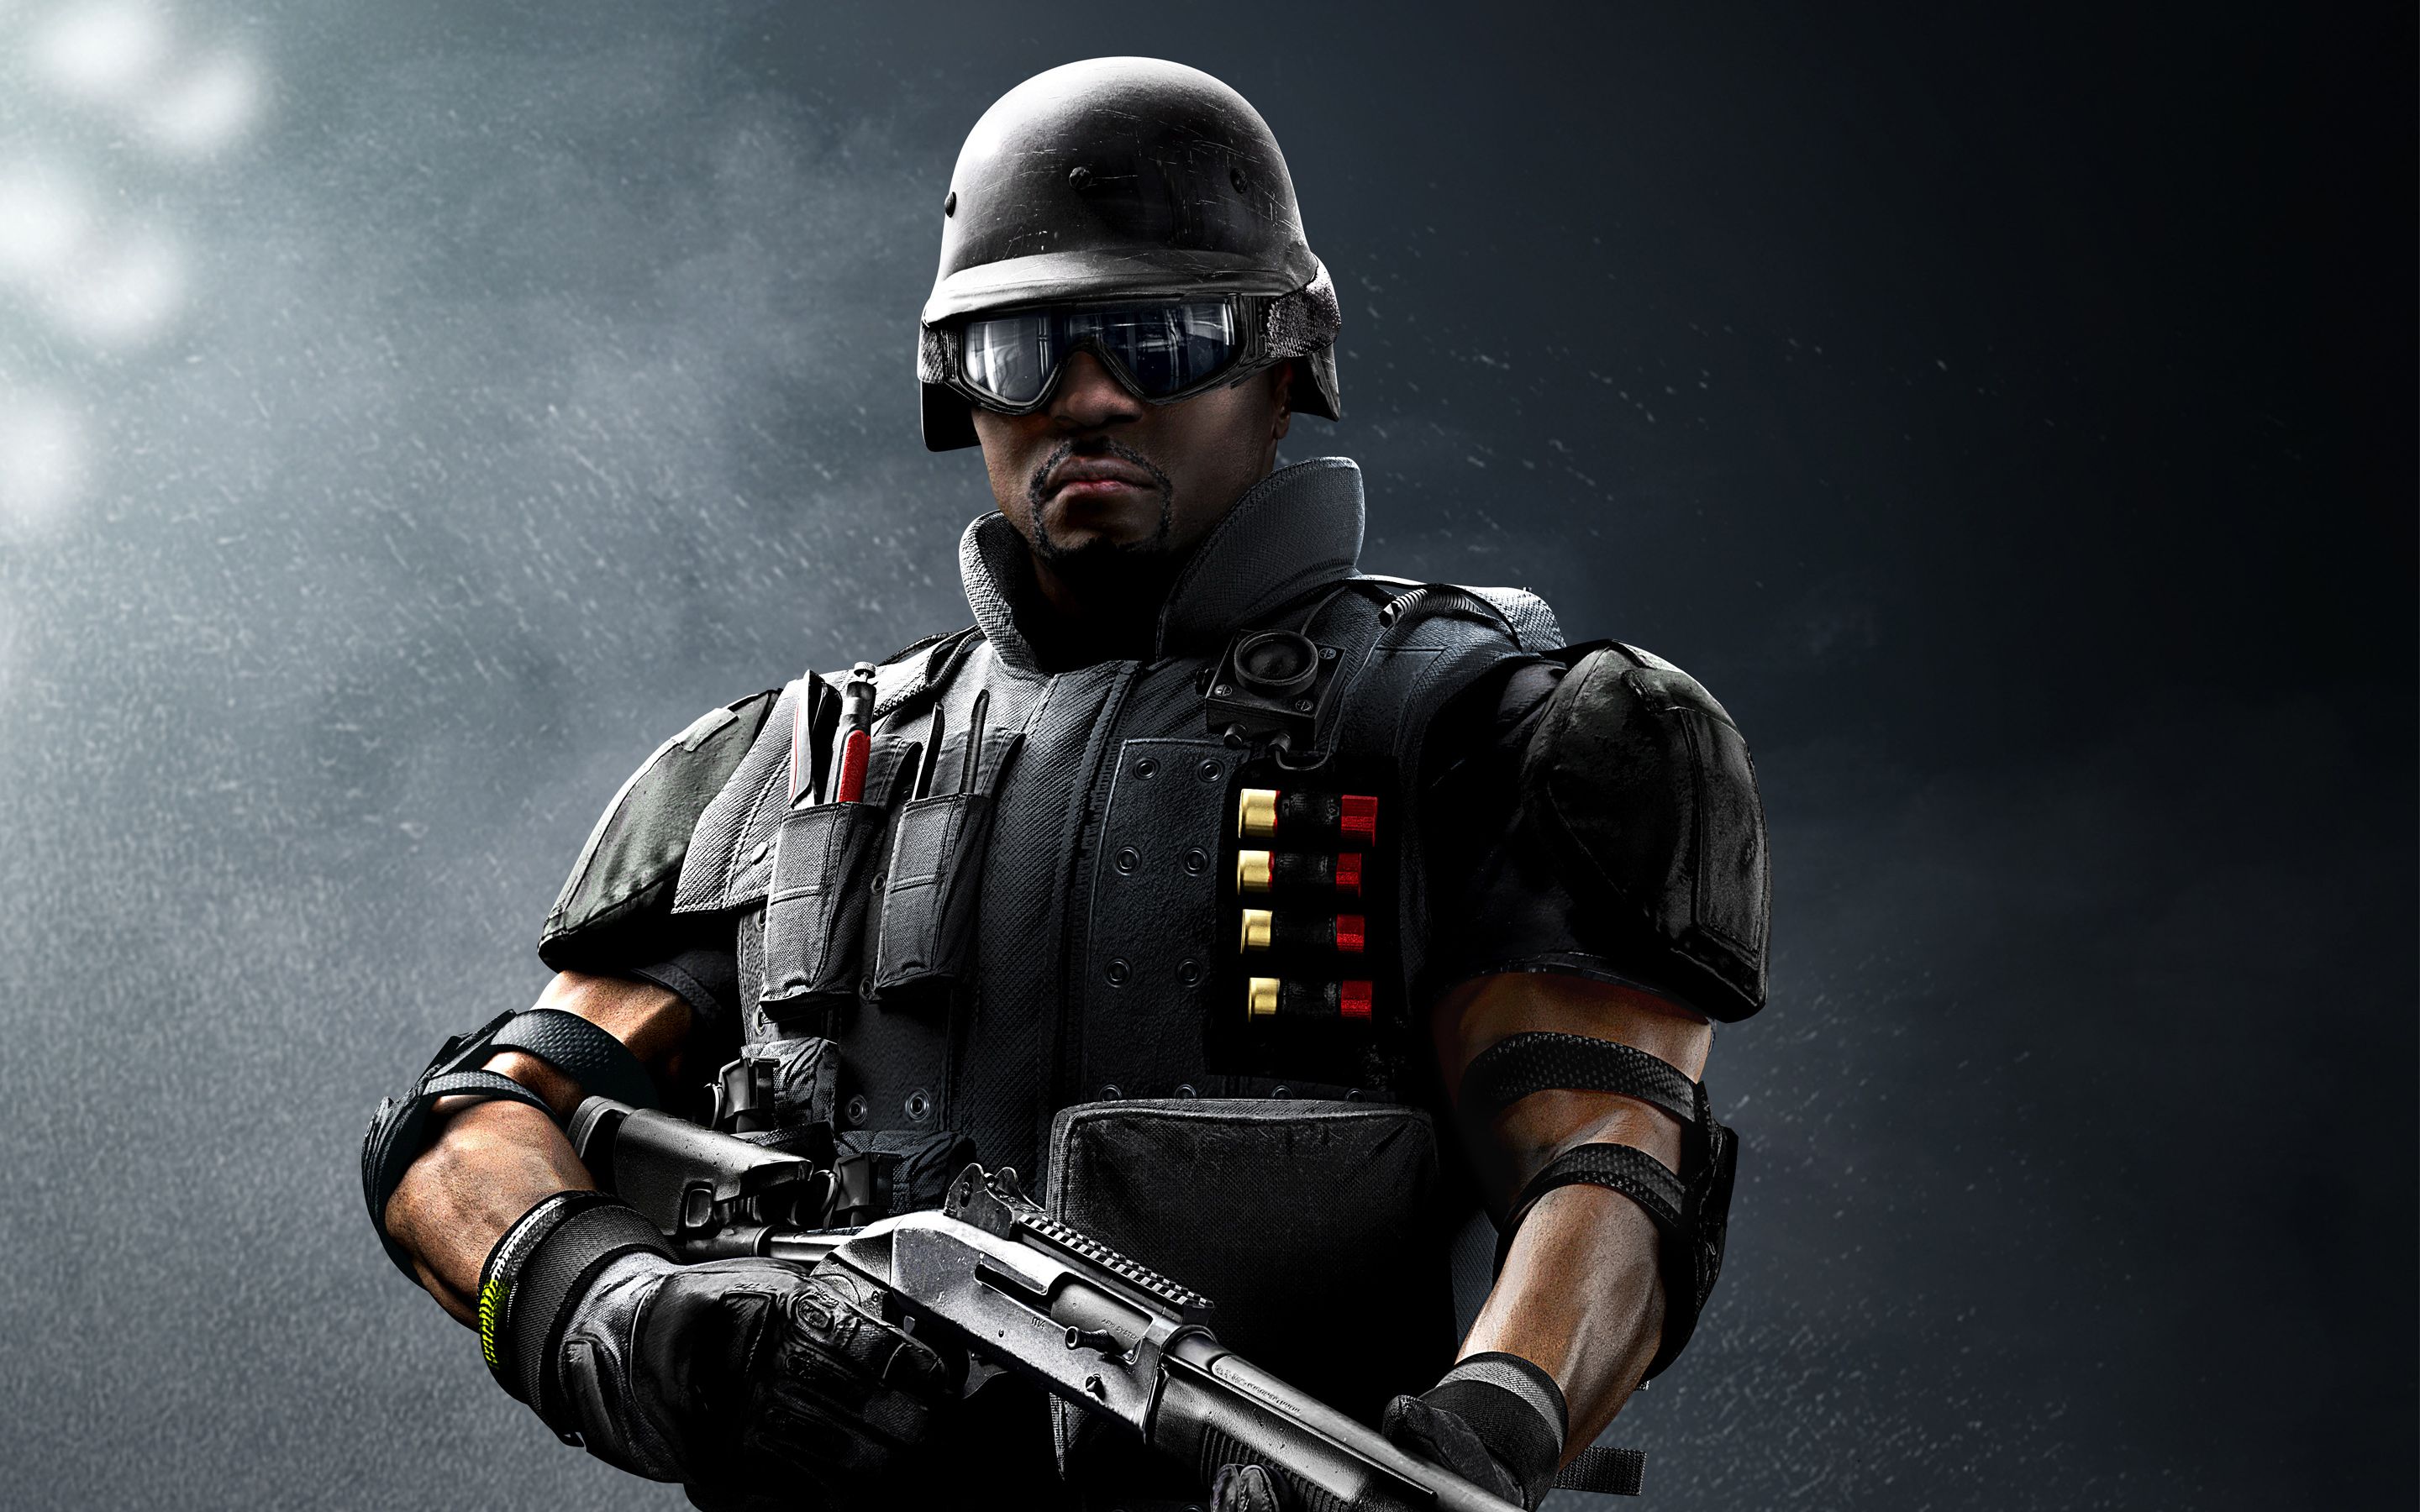 Swat 4K wallpaper for your desktop or mobile screen free and easy to download